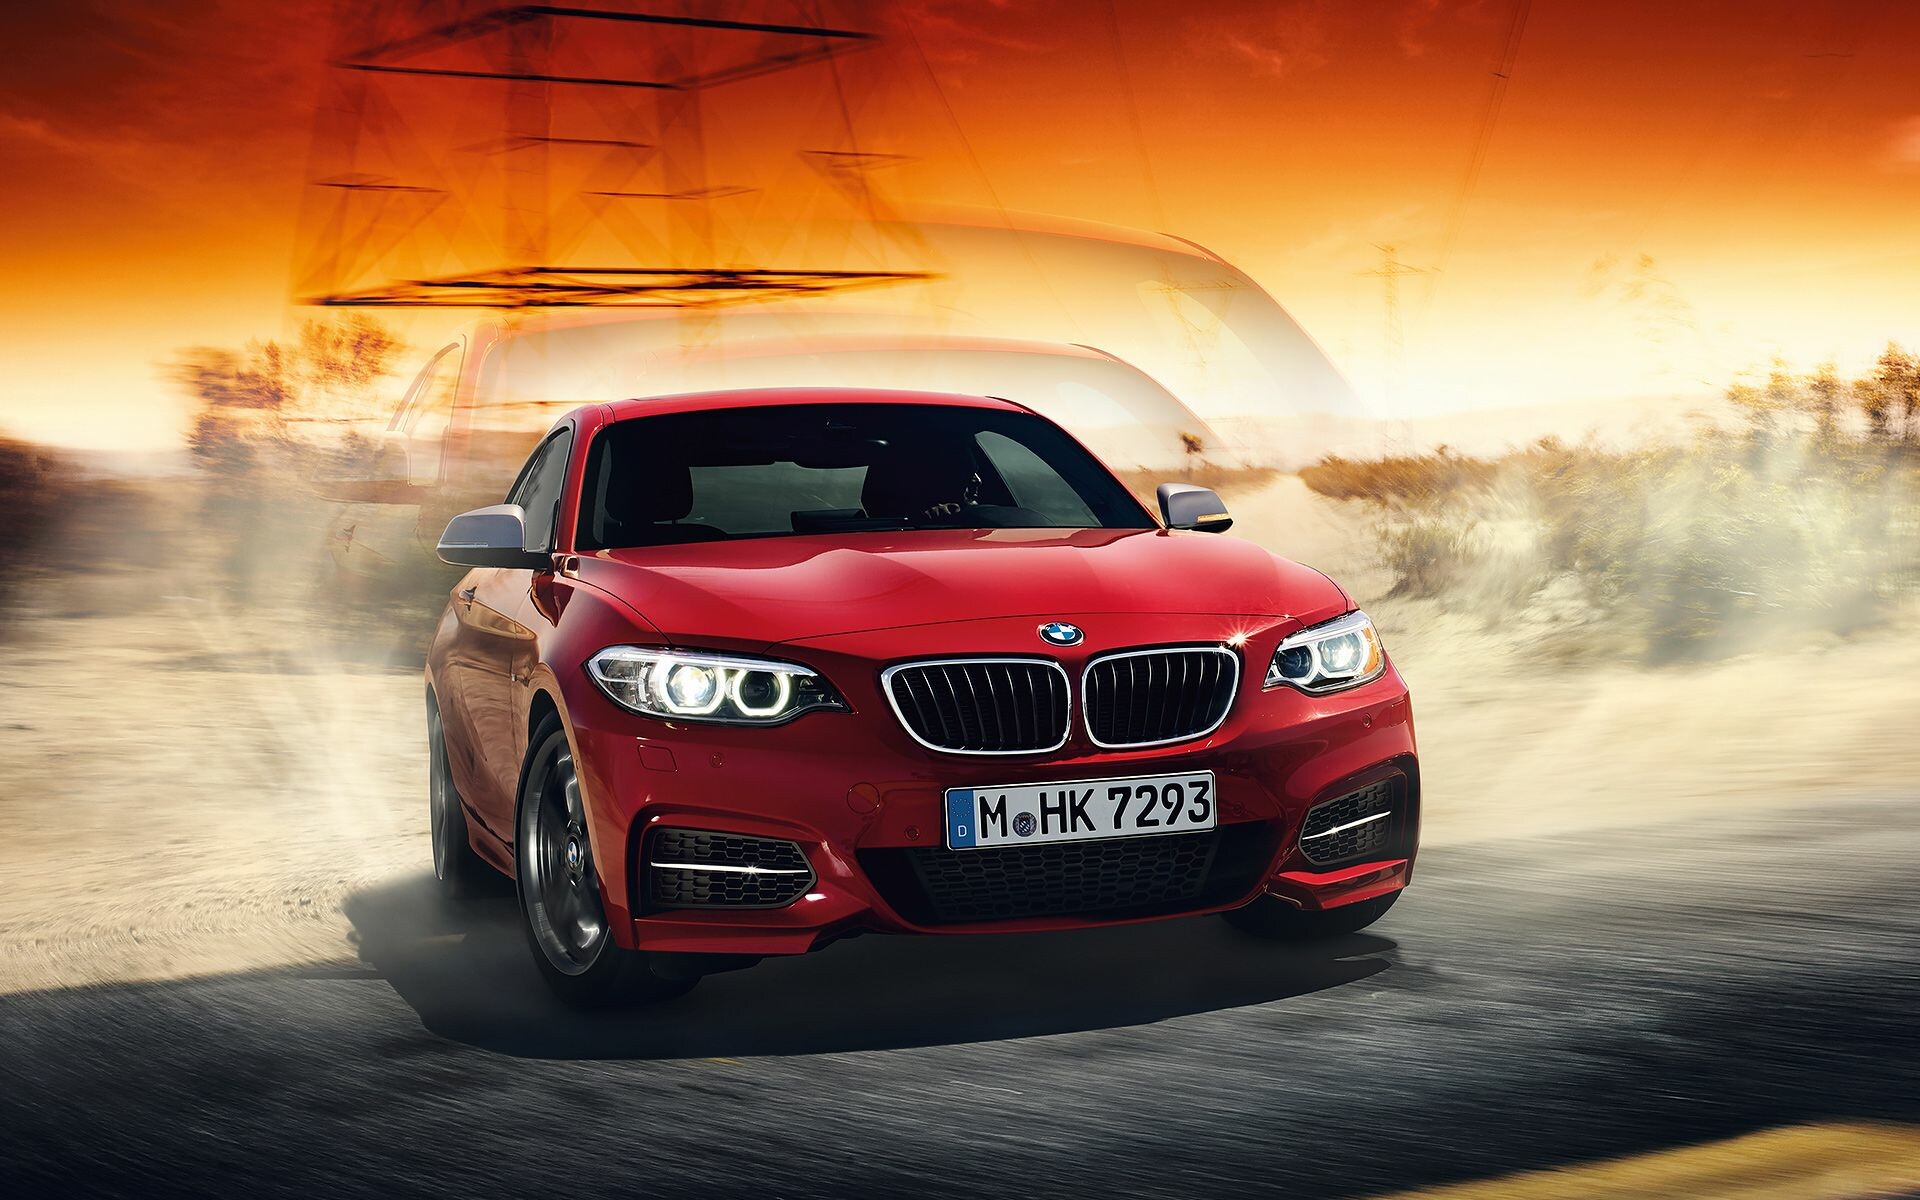 BMW 2 Series: One of today's most successful luxury car brands, Rear-wheel-drive-based model. 1920x1200 HD Background.